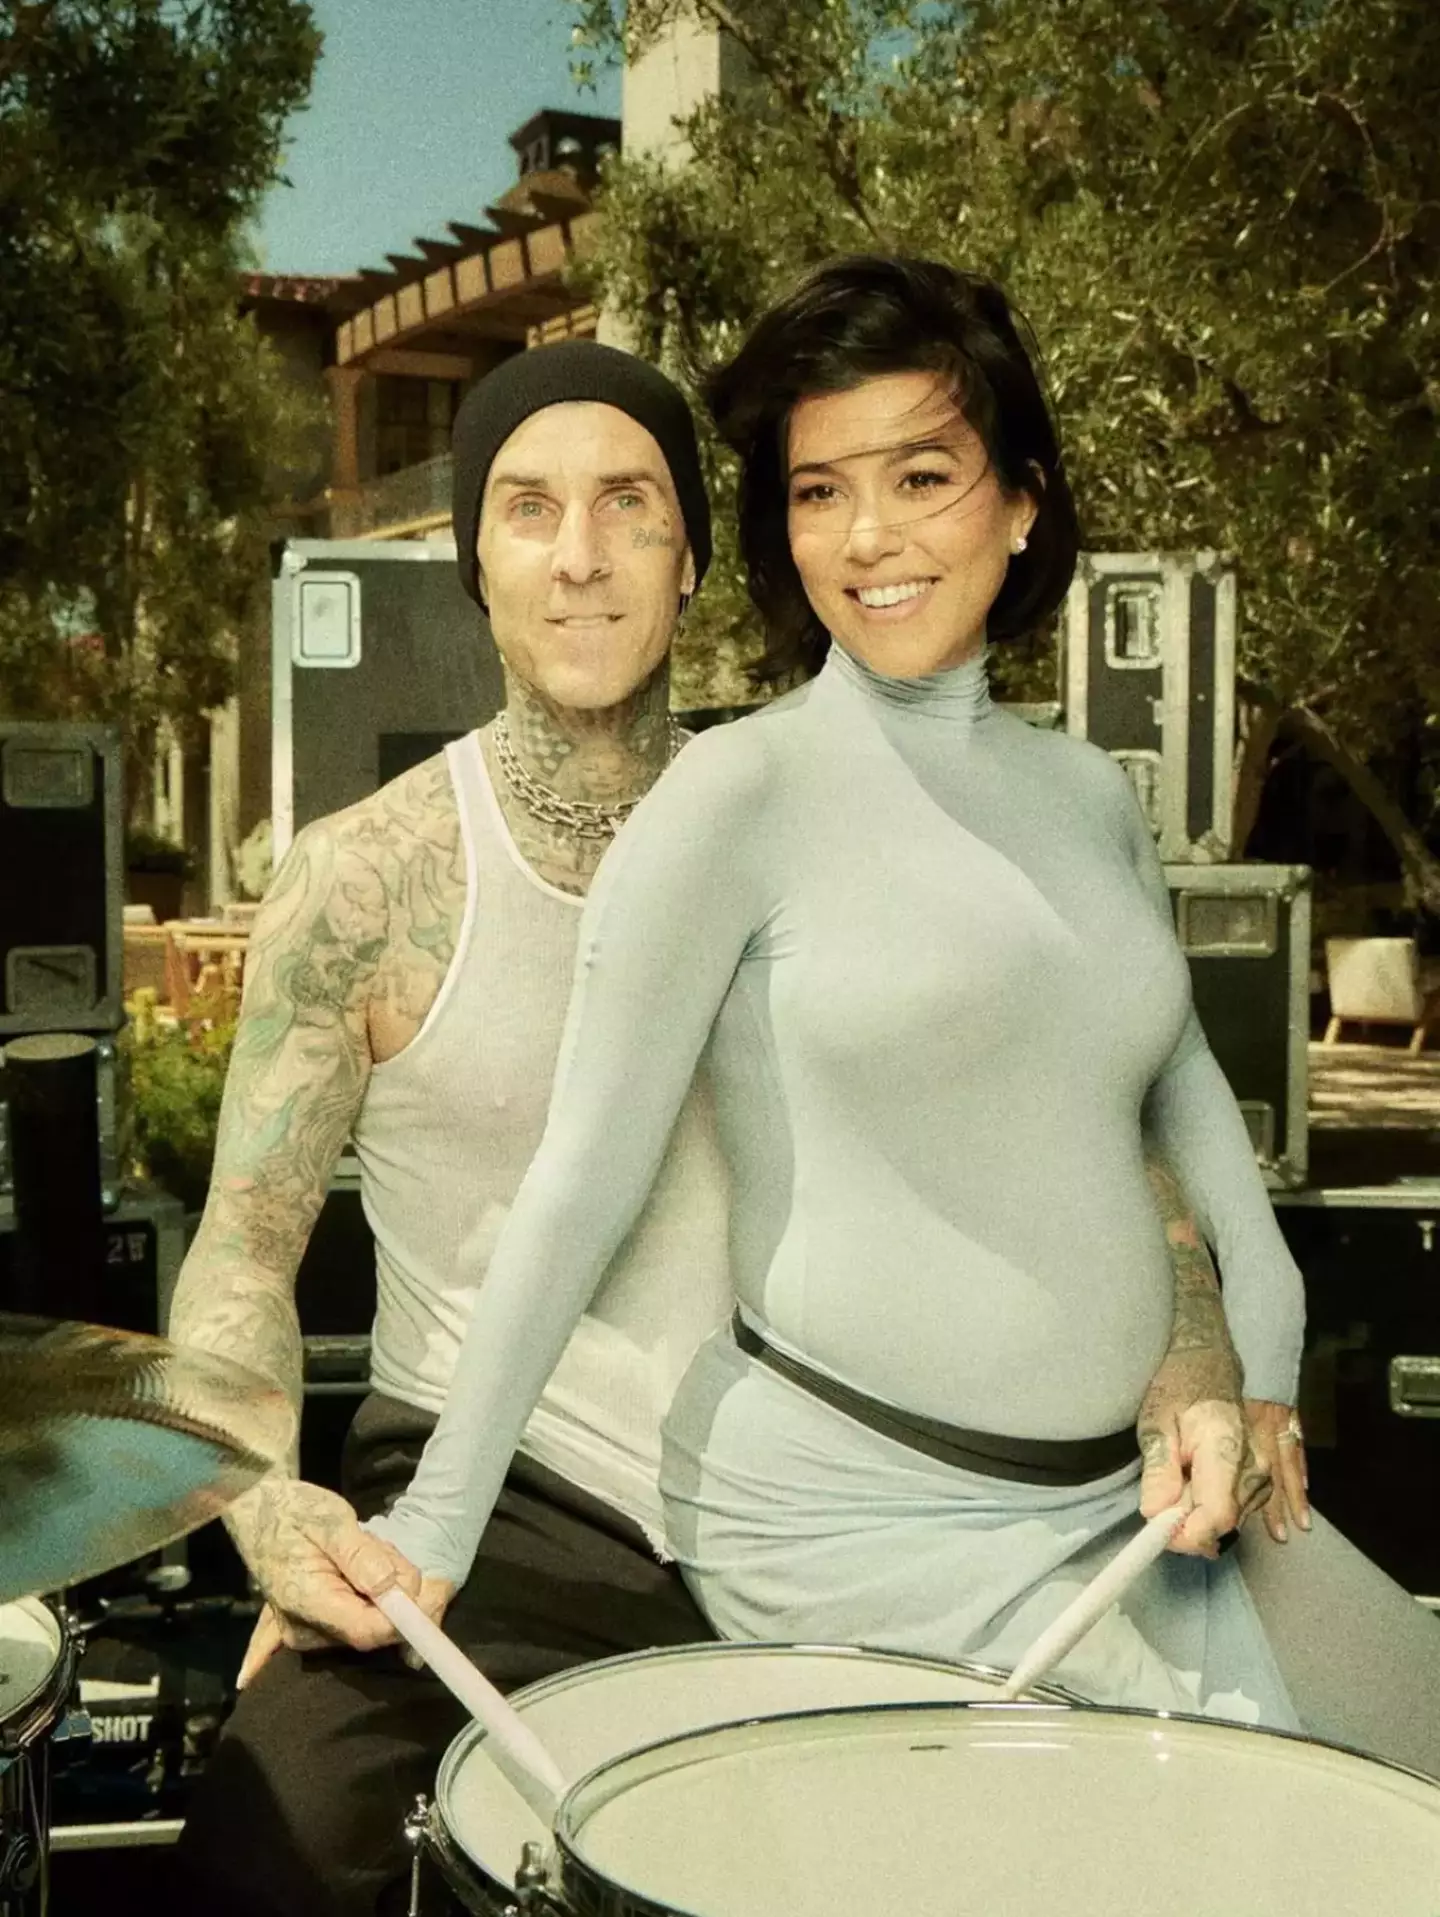 Kourtney is expecting a baby boy with husband Travis Barker.